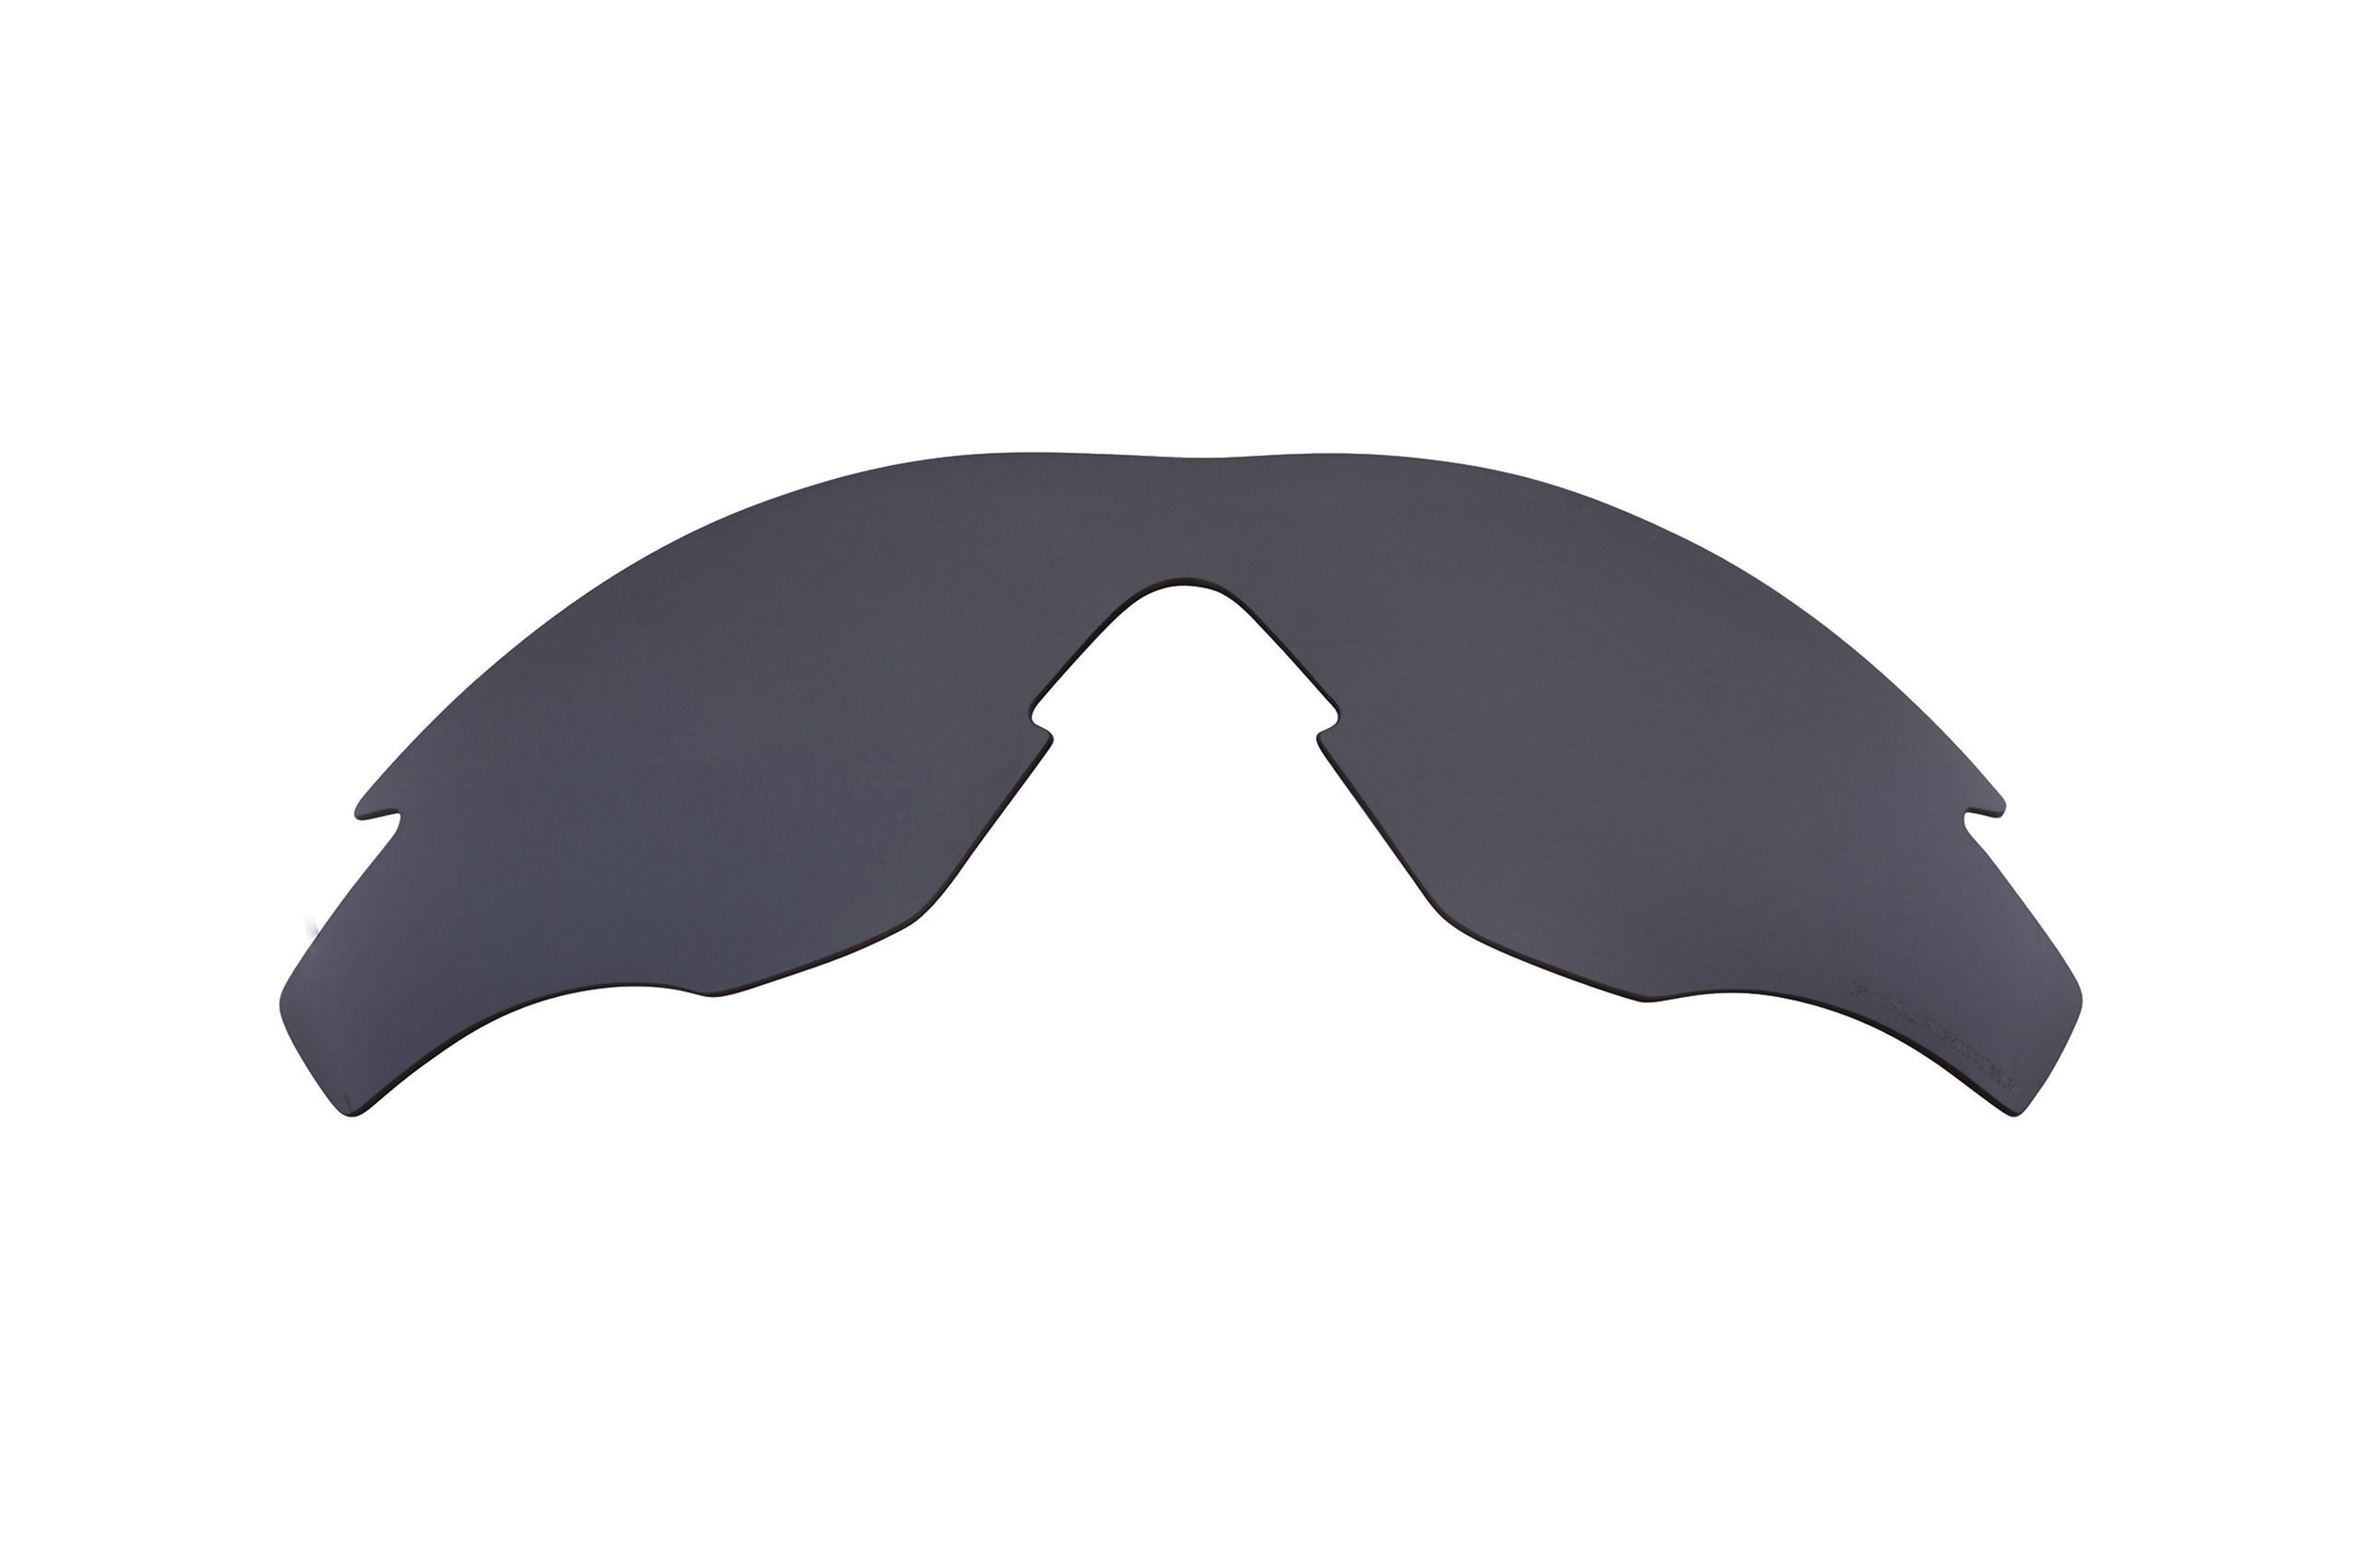 oakley m2 frame replacement lenses